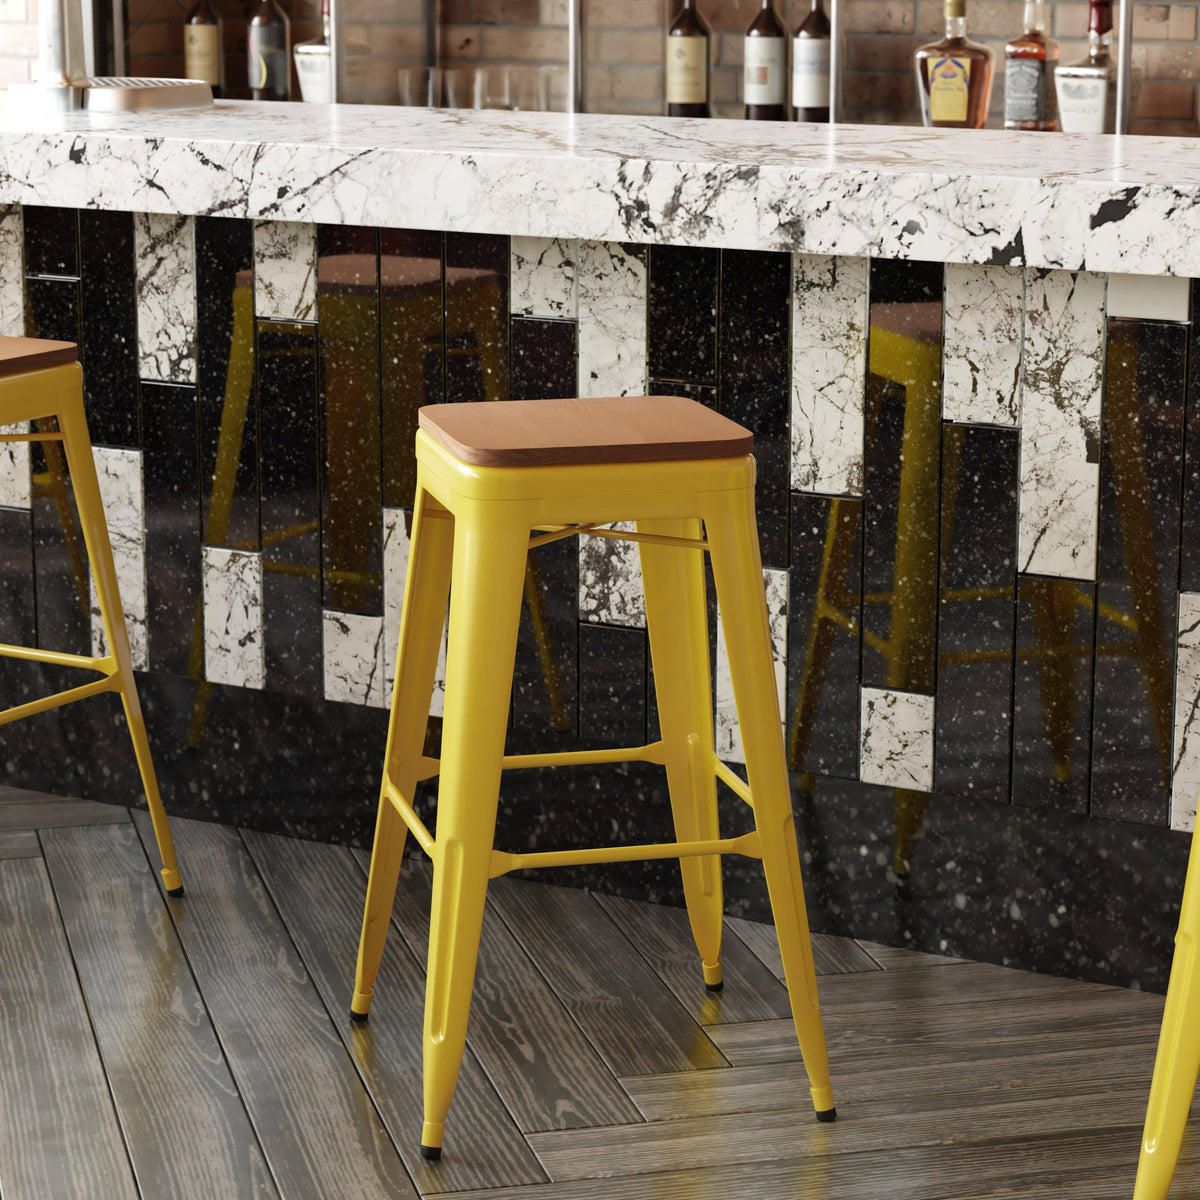 Yellow/Teak |#| Indoor/Outdoor Backless Bar Stool with Poly Seat - Yellow/Teak